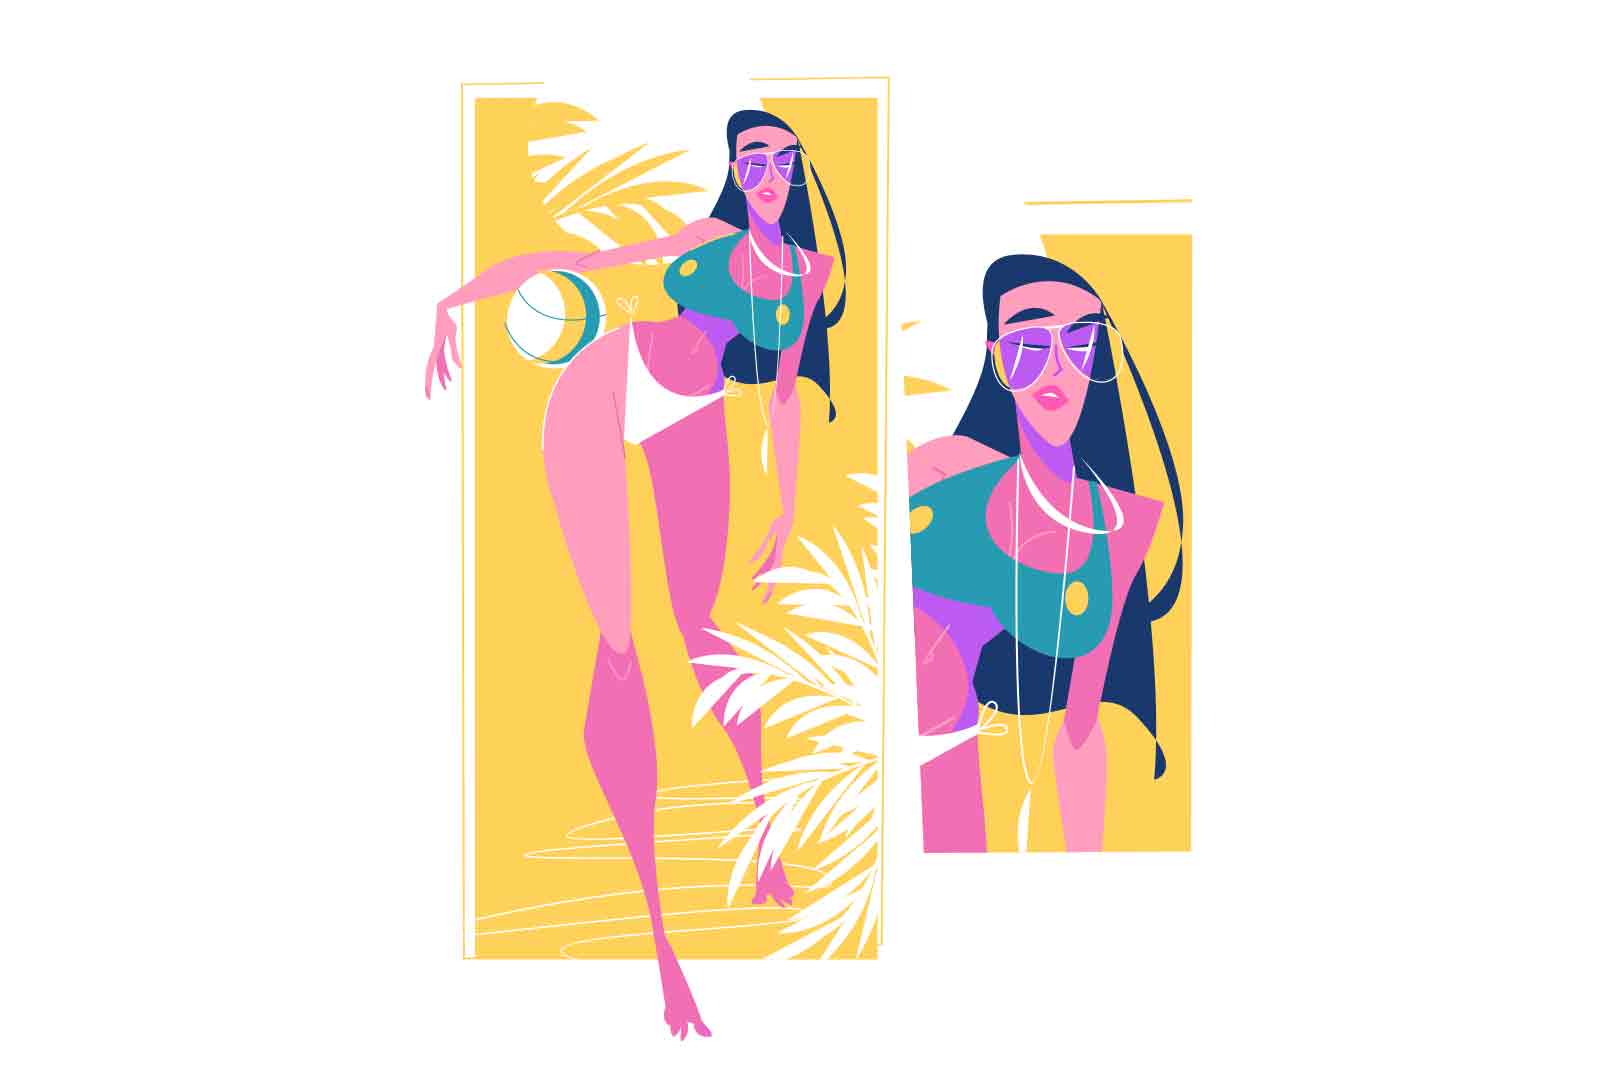 Fit young girl on beach vector illustration. Woman in swimsuit with ball flat style. Summertime, vacation, beach volleyball game concept